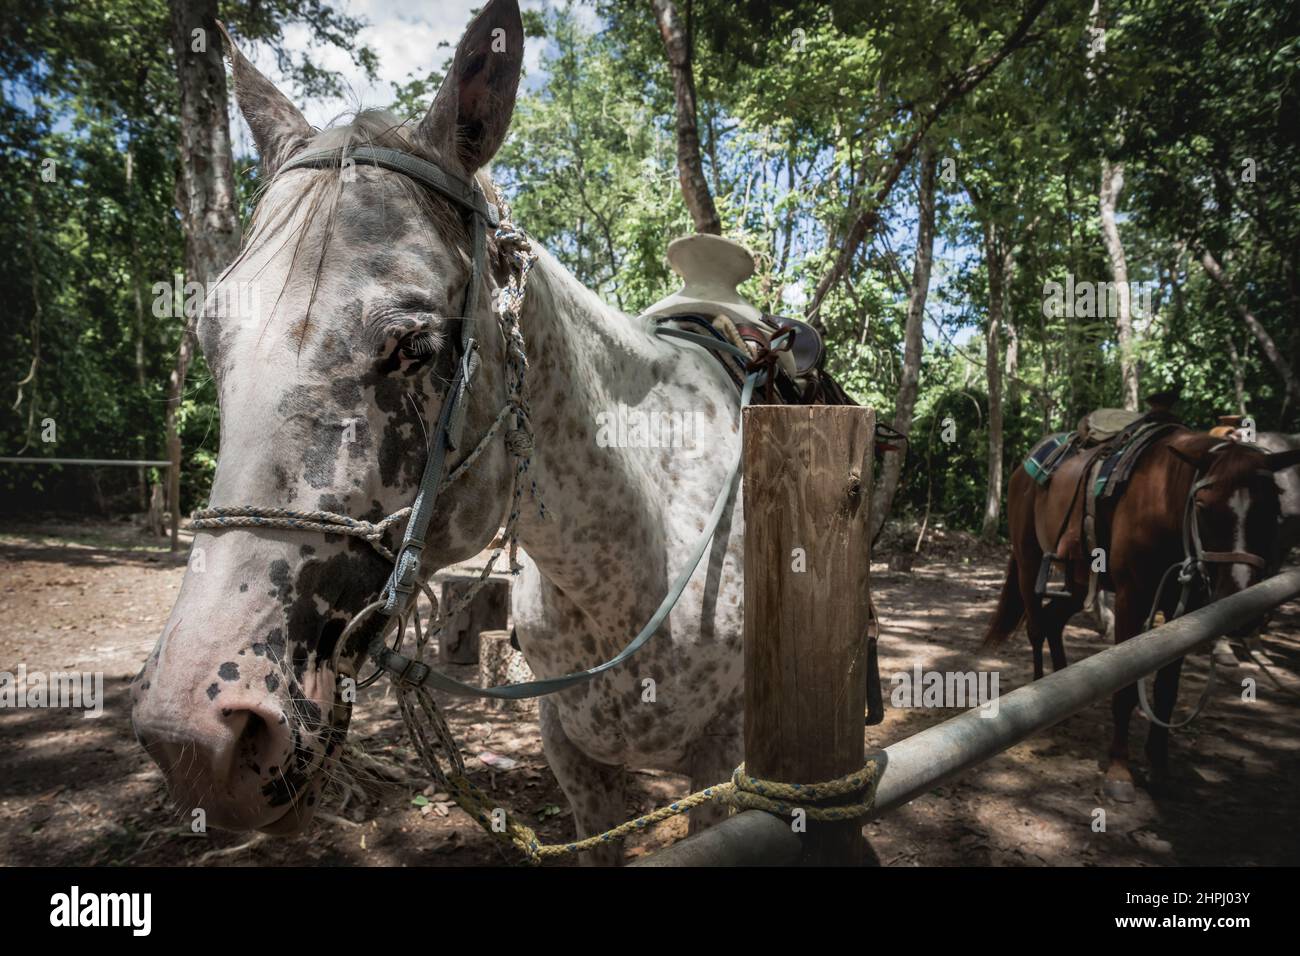 White black-dotted saddled horse tied to fence for waiting in tropical forest, Belize Stock Photo